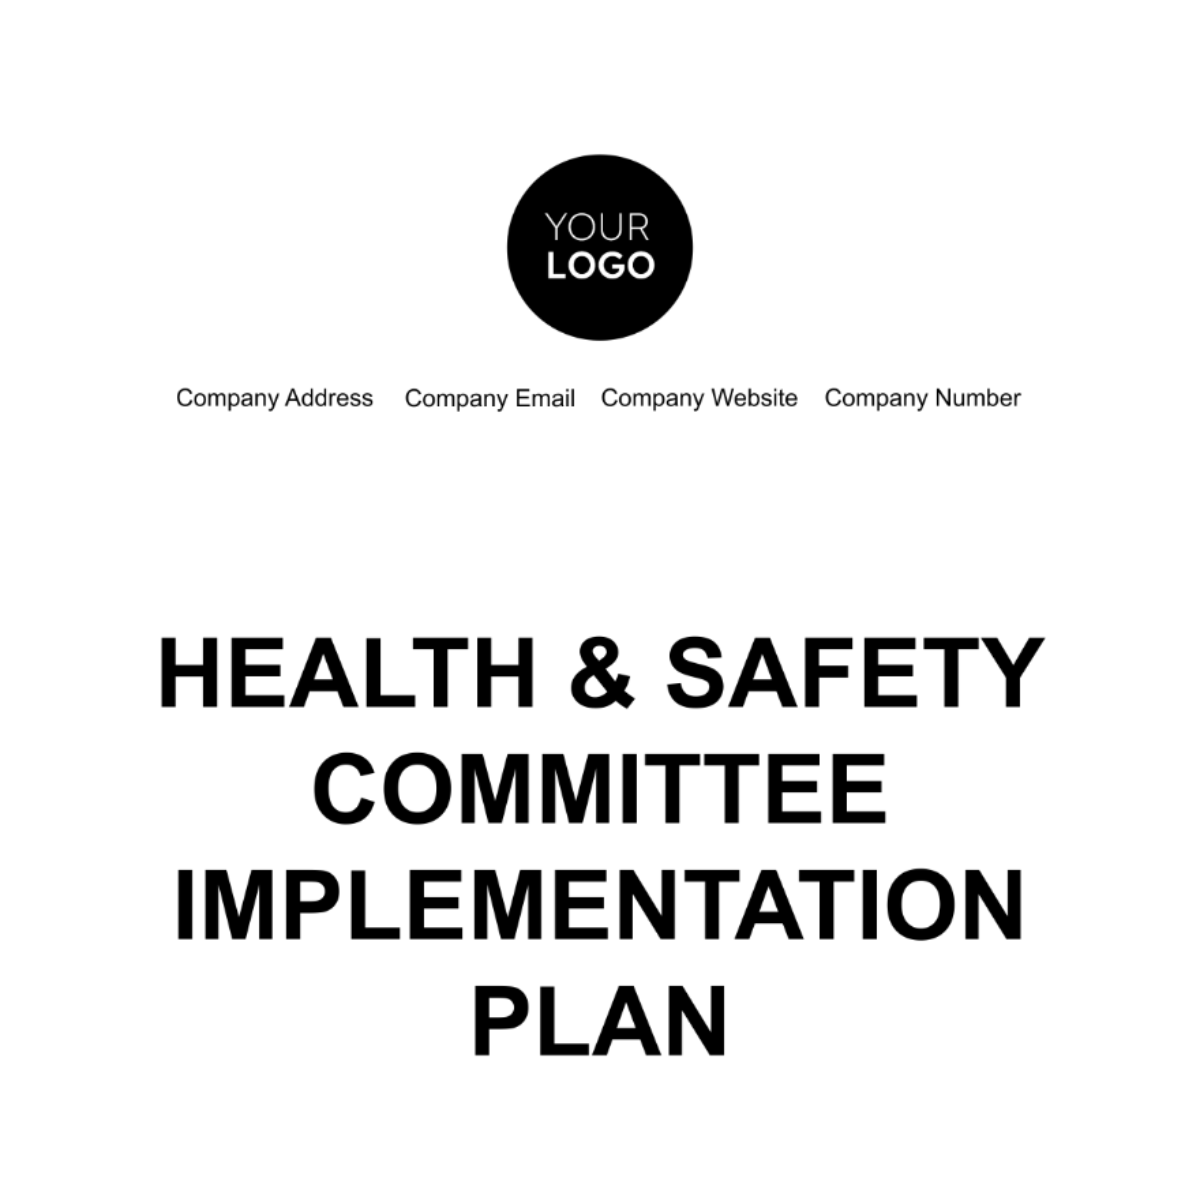 Free Health & Safety Committee Implementation Plan Template